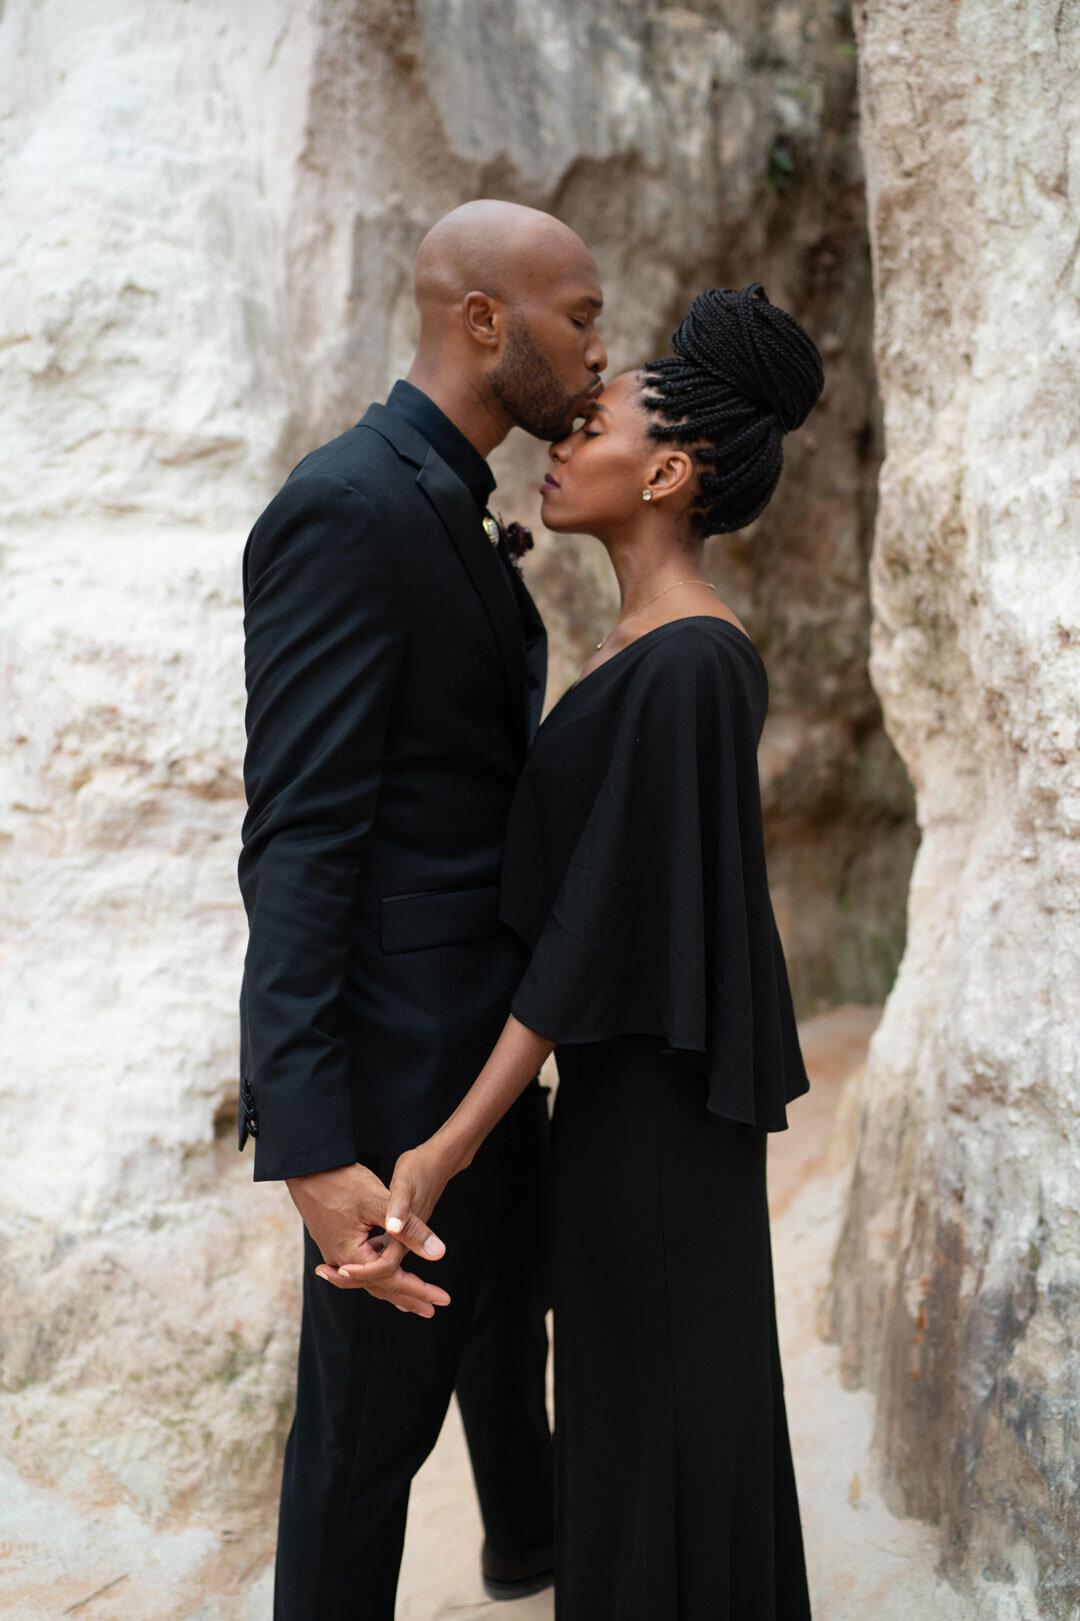 Black couple wearing black outfits embracing in the desert